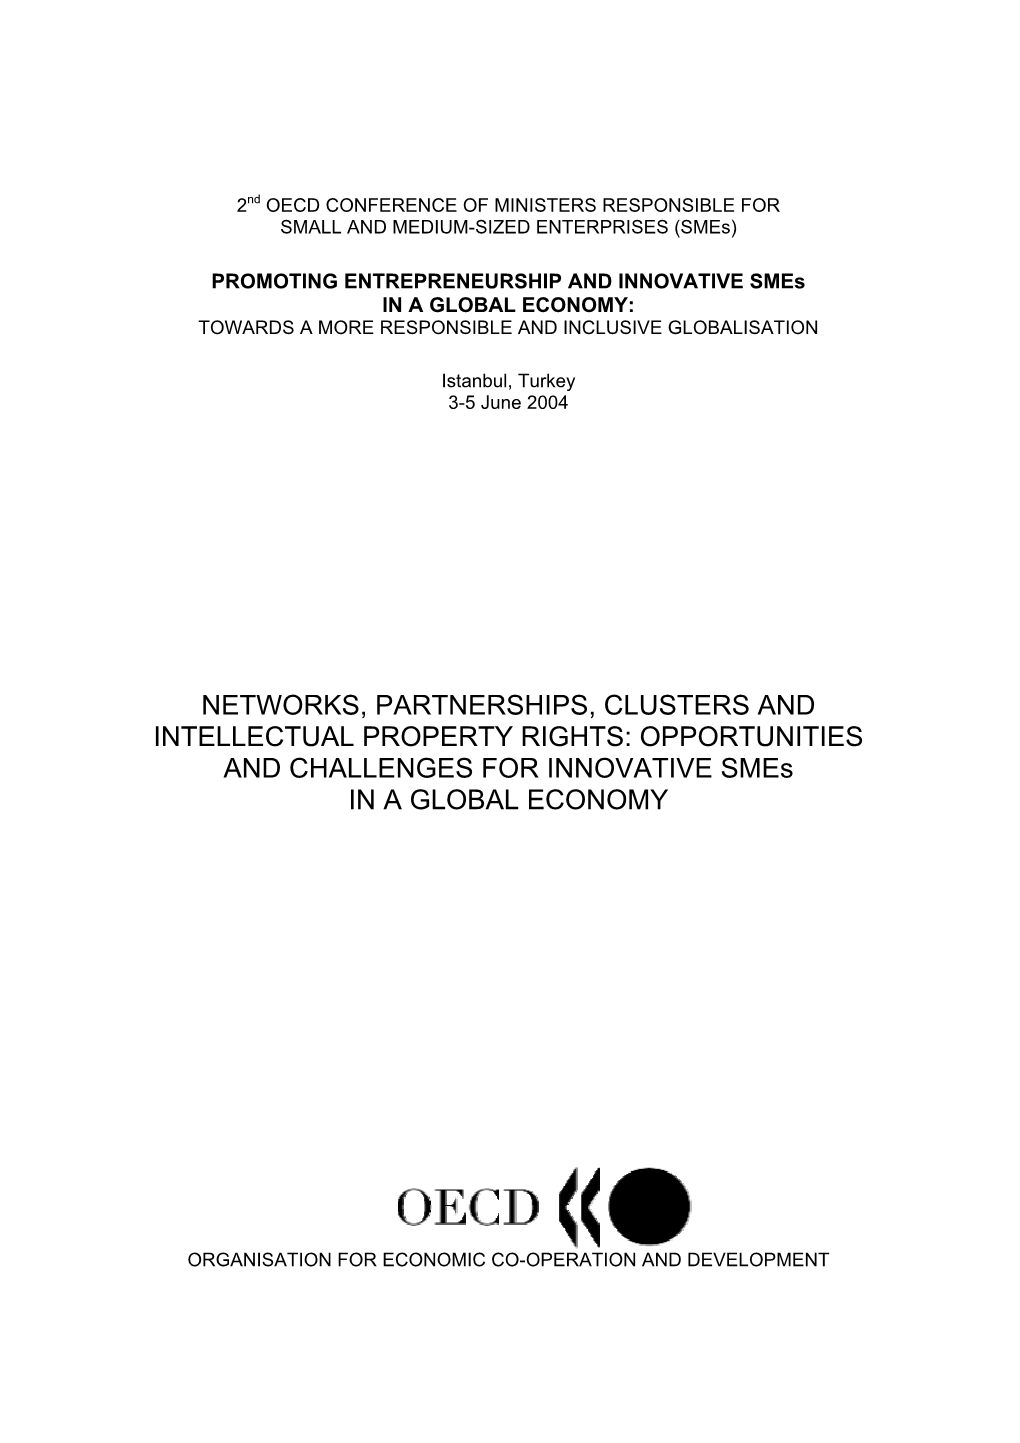 NETWORKS, PARTNERSHIPS, CLUSTERS and INTELLECTUAL PROPERTY RIGHTS: OPPORTUNITIES and CHALLENGES for INNOVATIVE Smes in a GLOBAL ECONOMY